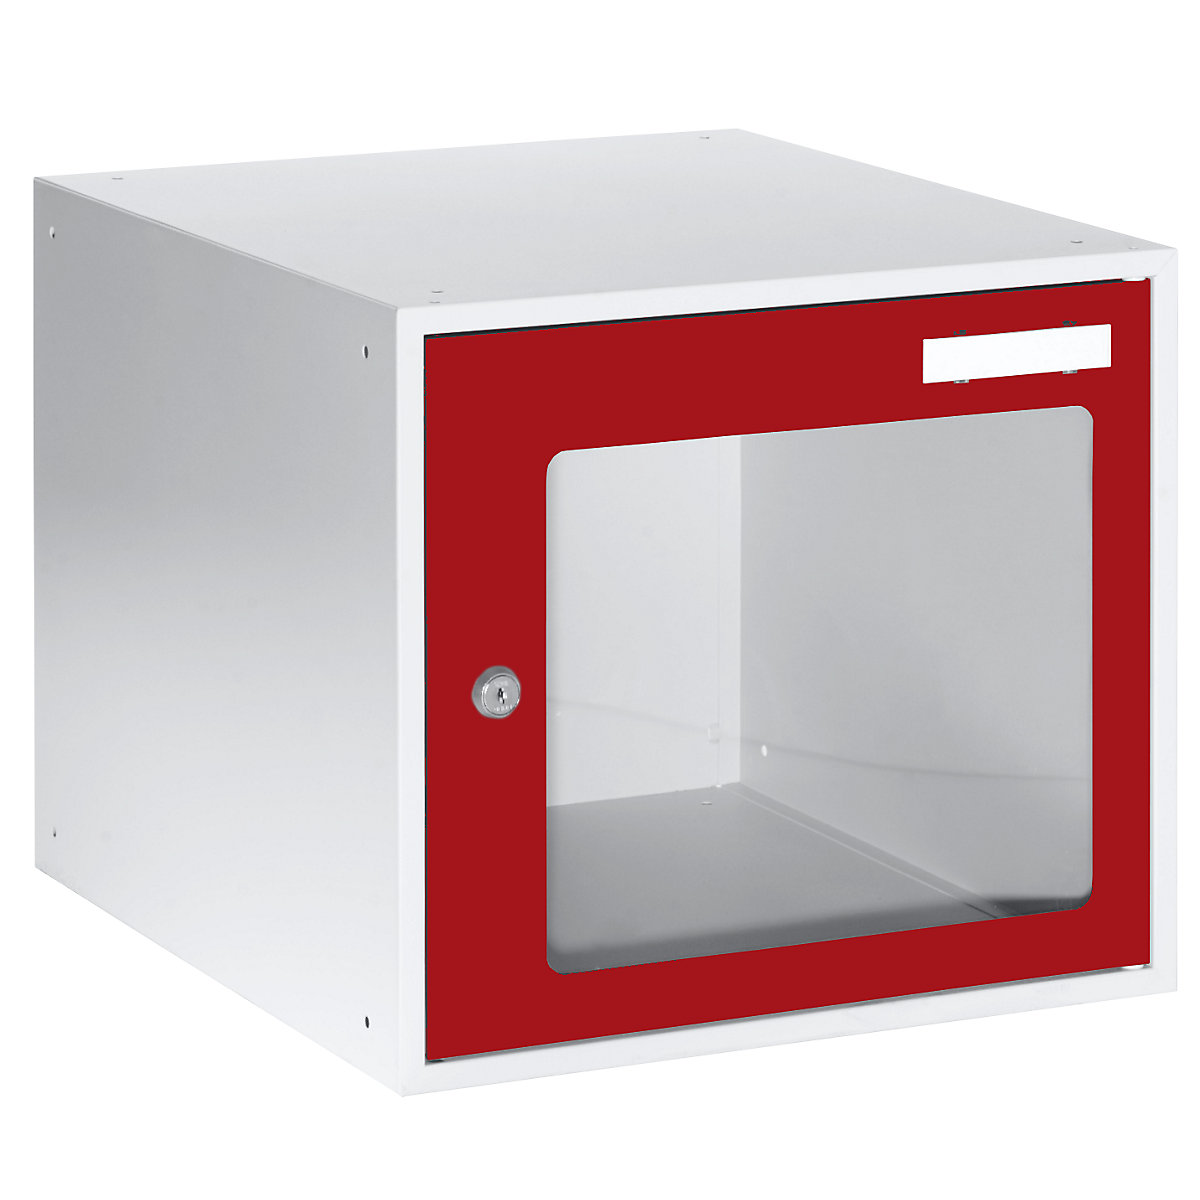 Cube lockers with vision panel – eurokraft basic, HxWxD 350 x 400 x 450 mm, door frame flame red RAL 3000-4